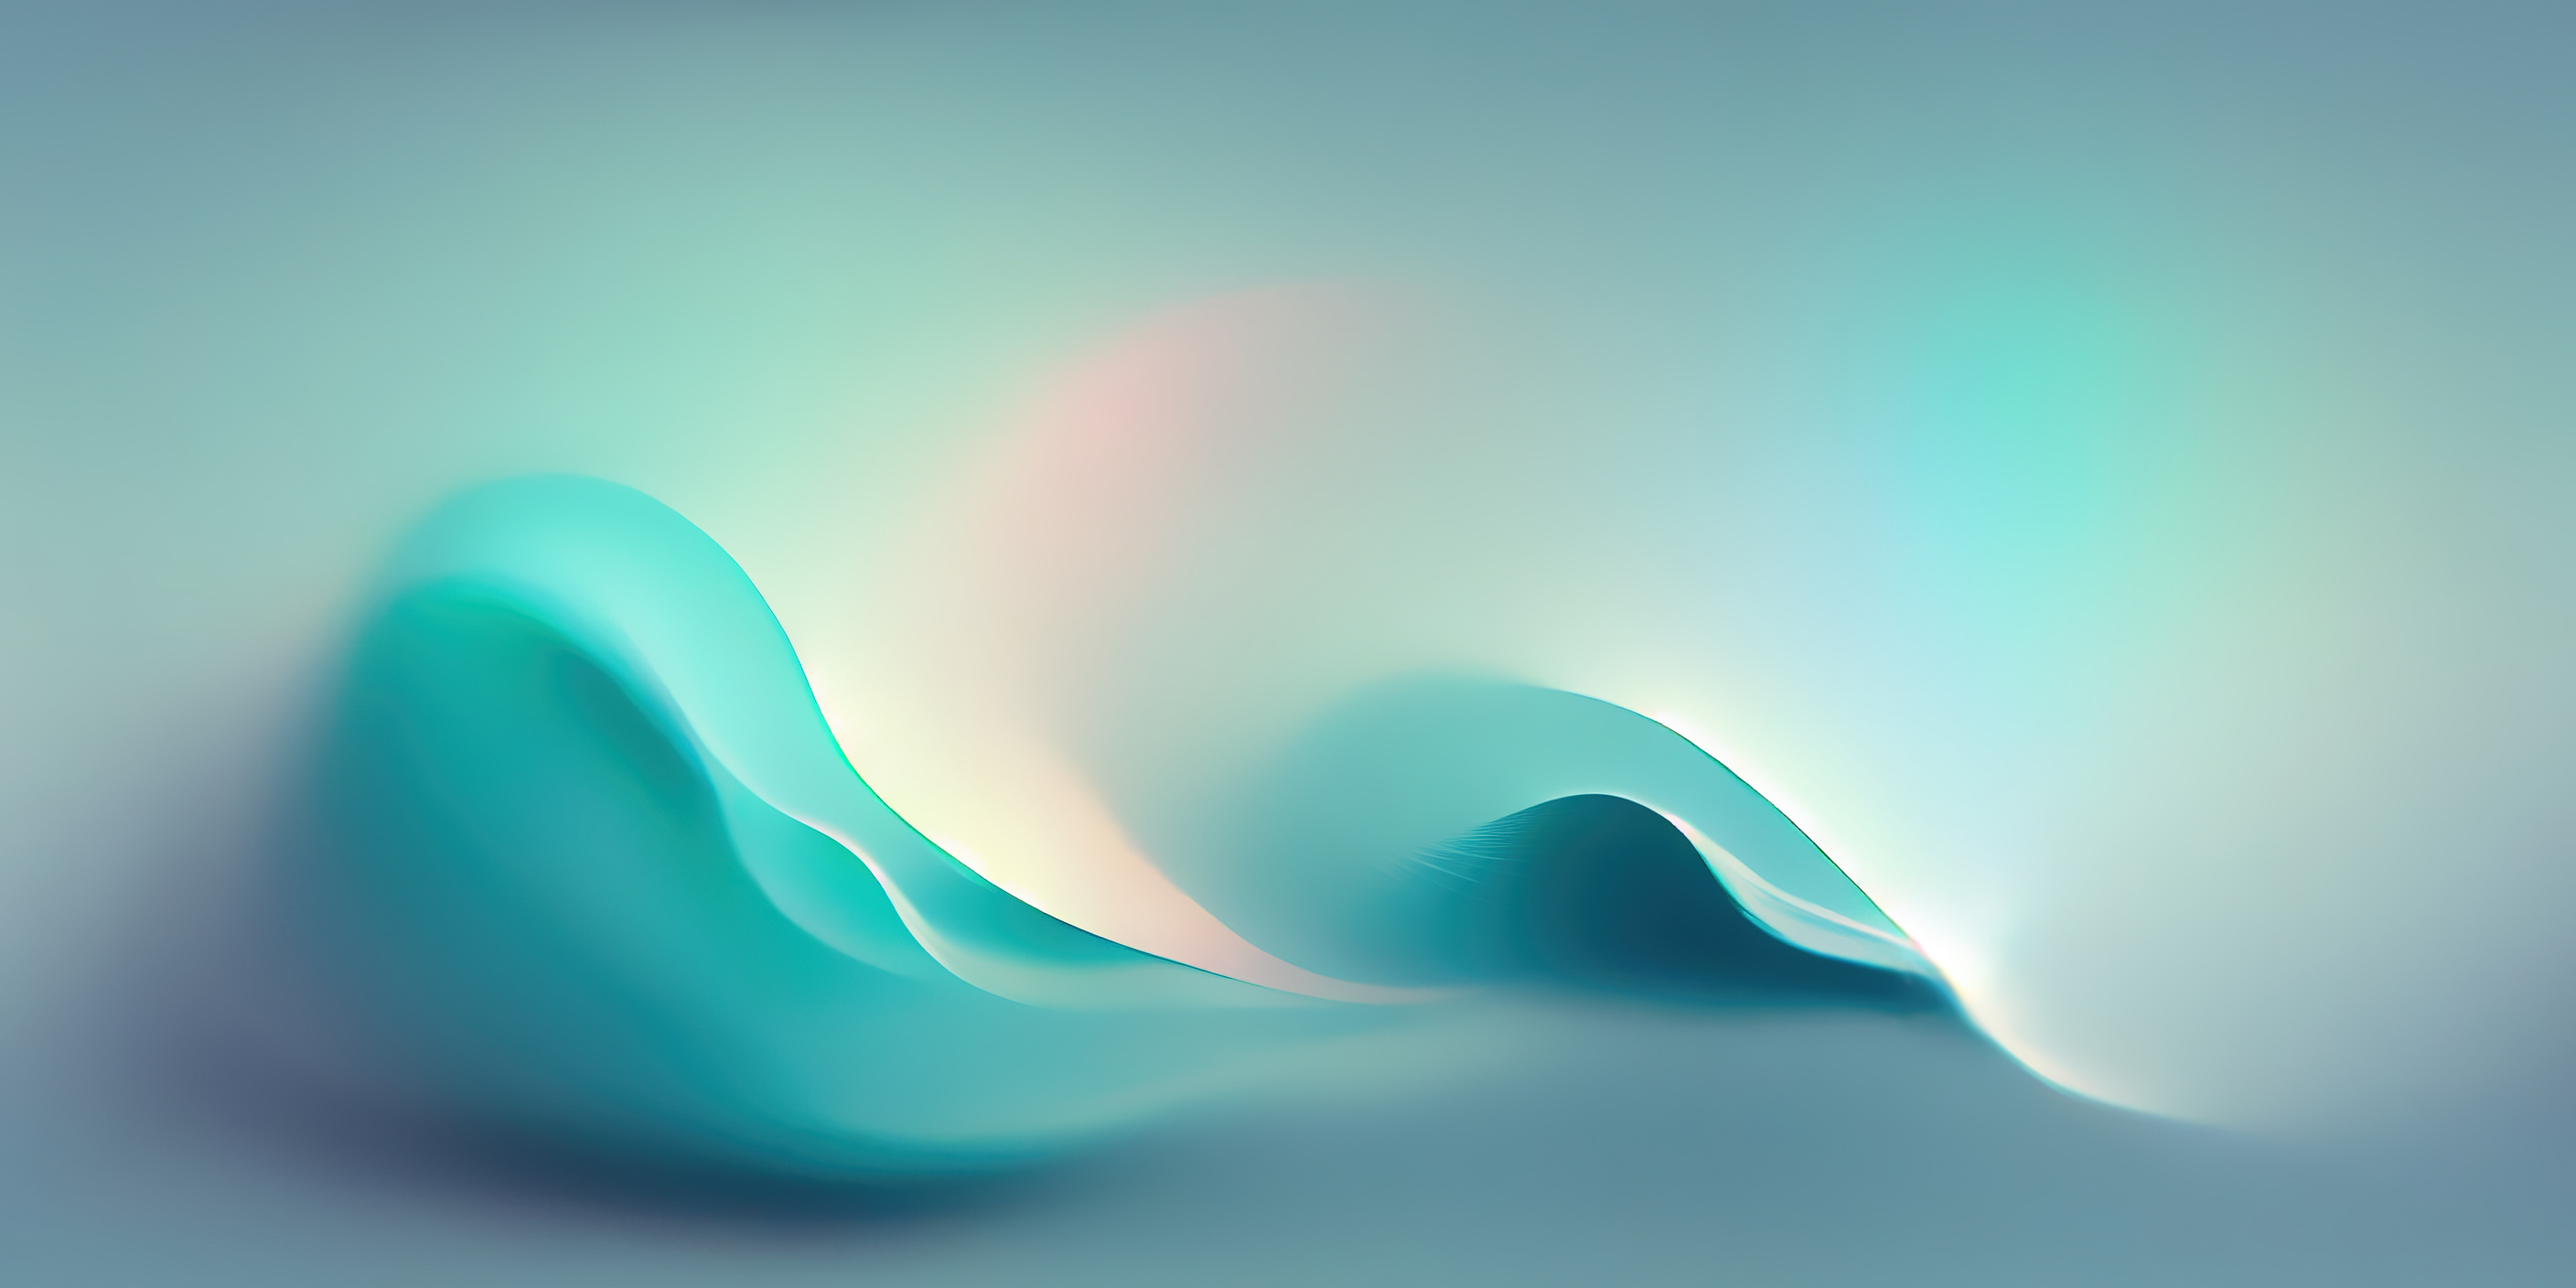 Smooth texture with a blurring effect, soft cyan wavy liquid flow